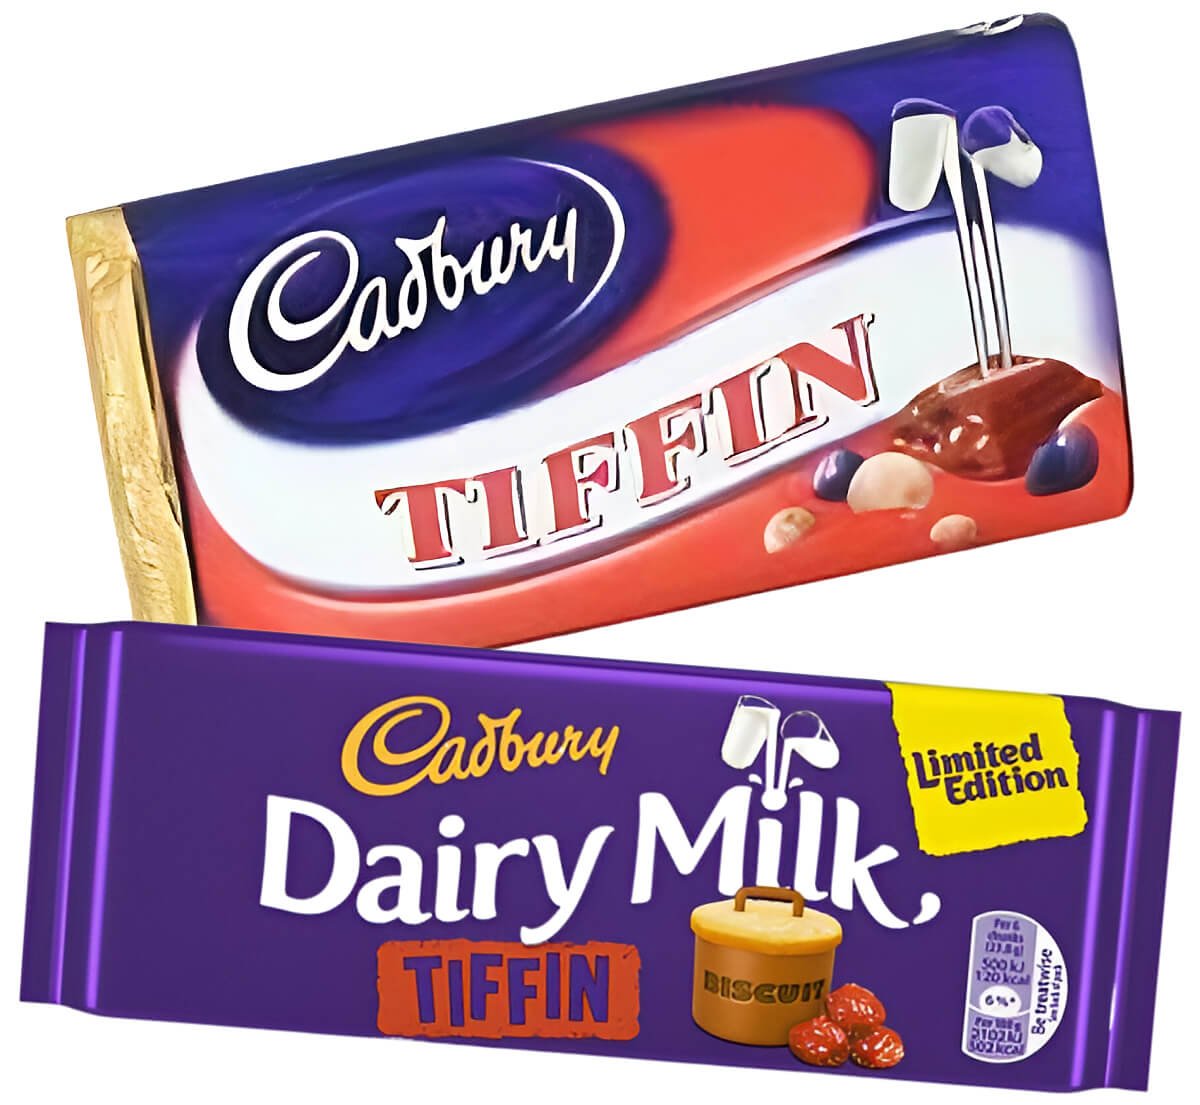 Two Cadbury Tiffin chocolate bars with different wrappers